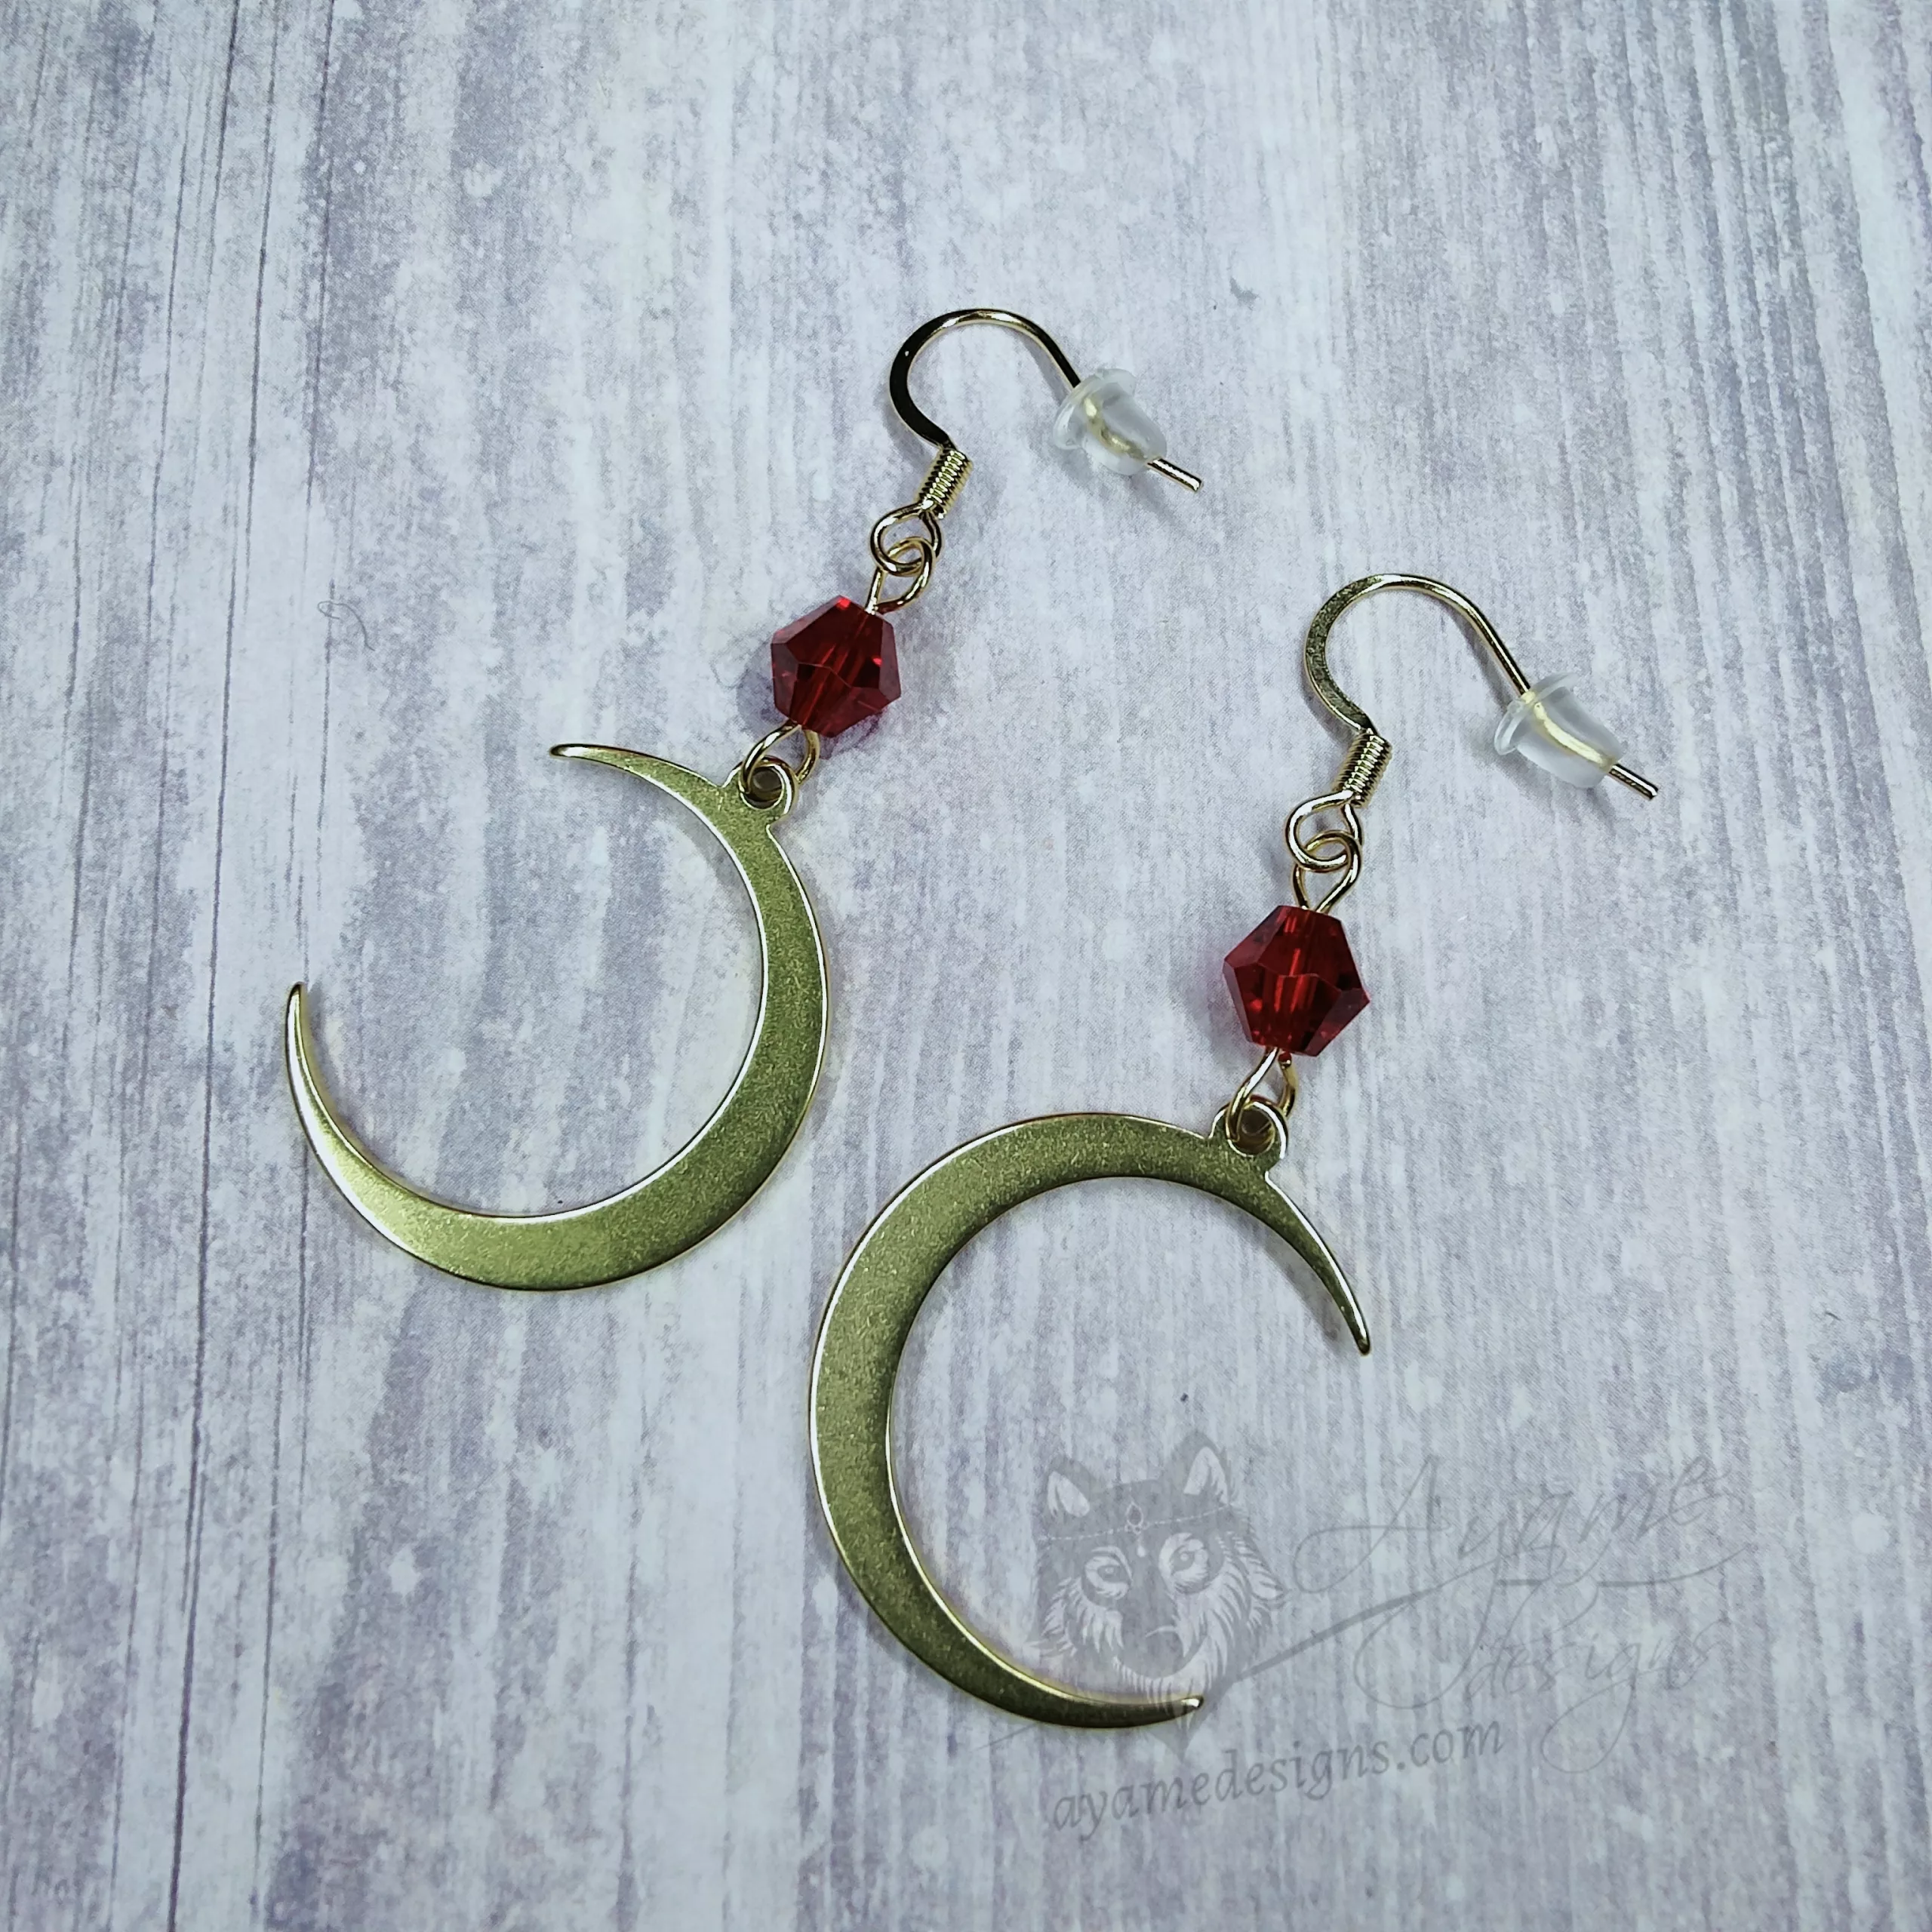 Handmade earrings with gold laser cut stainless steel moon charms with red Austrian crystal beads, on stainless steel earring hooks